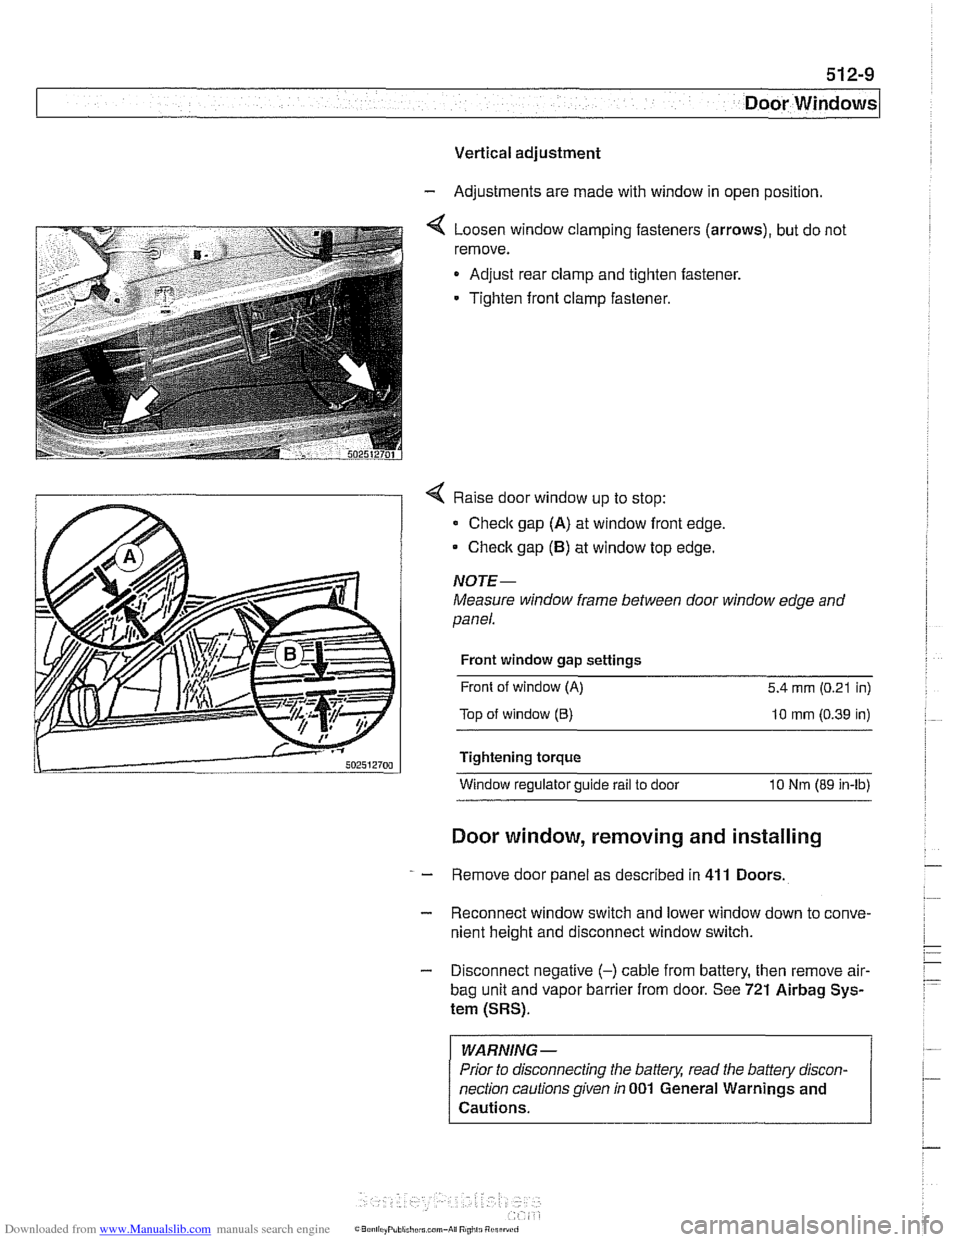 BMW 528i 1998 E39 Owners Manual Downloaded from www.Manualslib.com manuals search engine 
512-9 
Door Windows 
Vertical adjustment 
- Adjustments  are made with  window in open position 
4 Loosen window  clamping fasteners  (arrows)